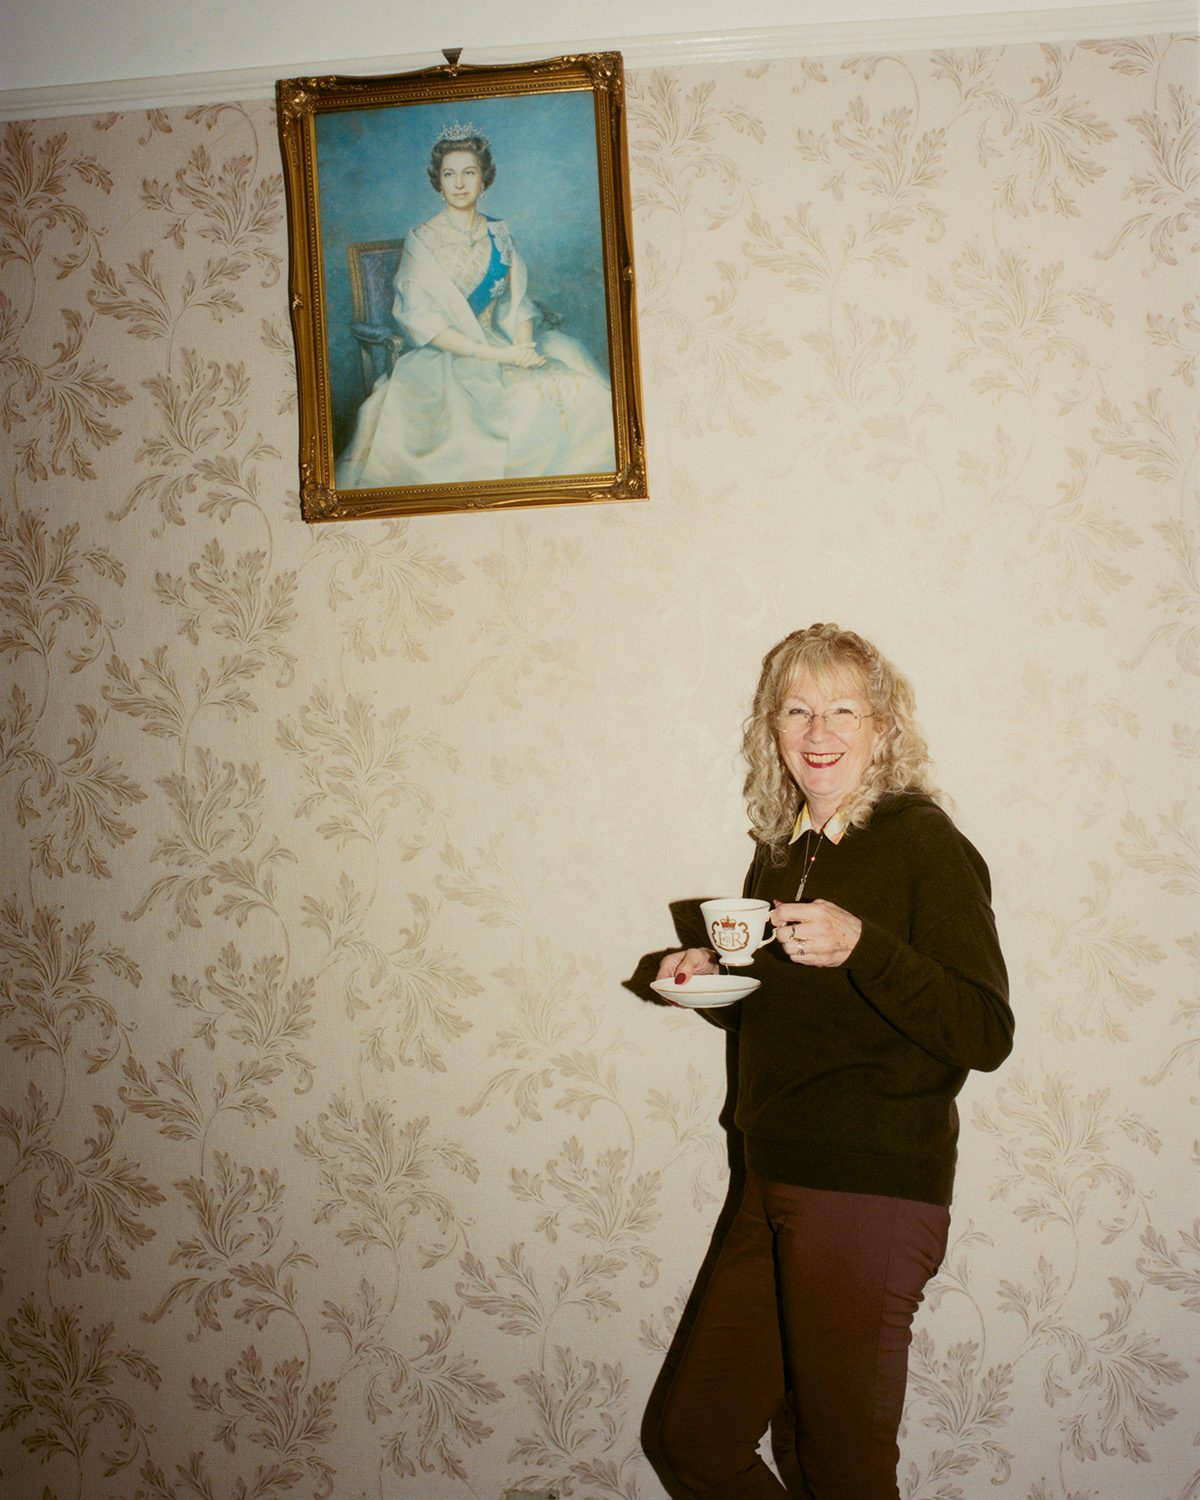 Photo of a woman holding a cup and saucer leaning against a wallpapered wall next to a portrait of Queen Elizabeth II